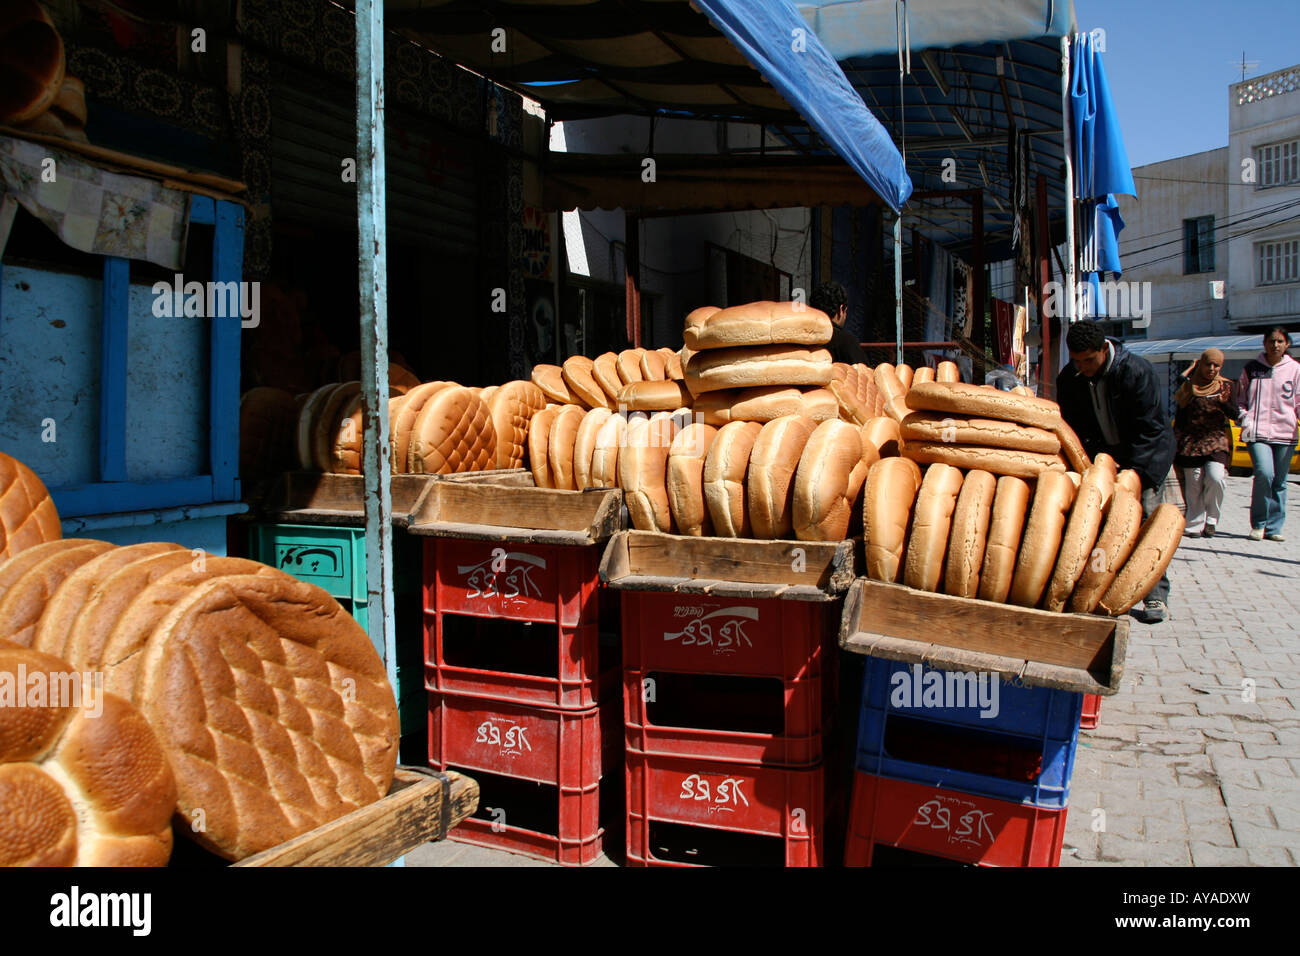 Street scene outside a bakery in Sousse, Tunisia, North Africa Stock Photo